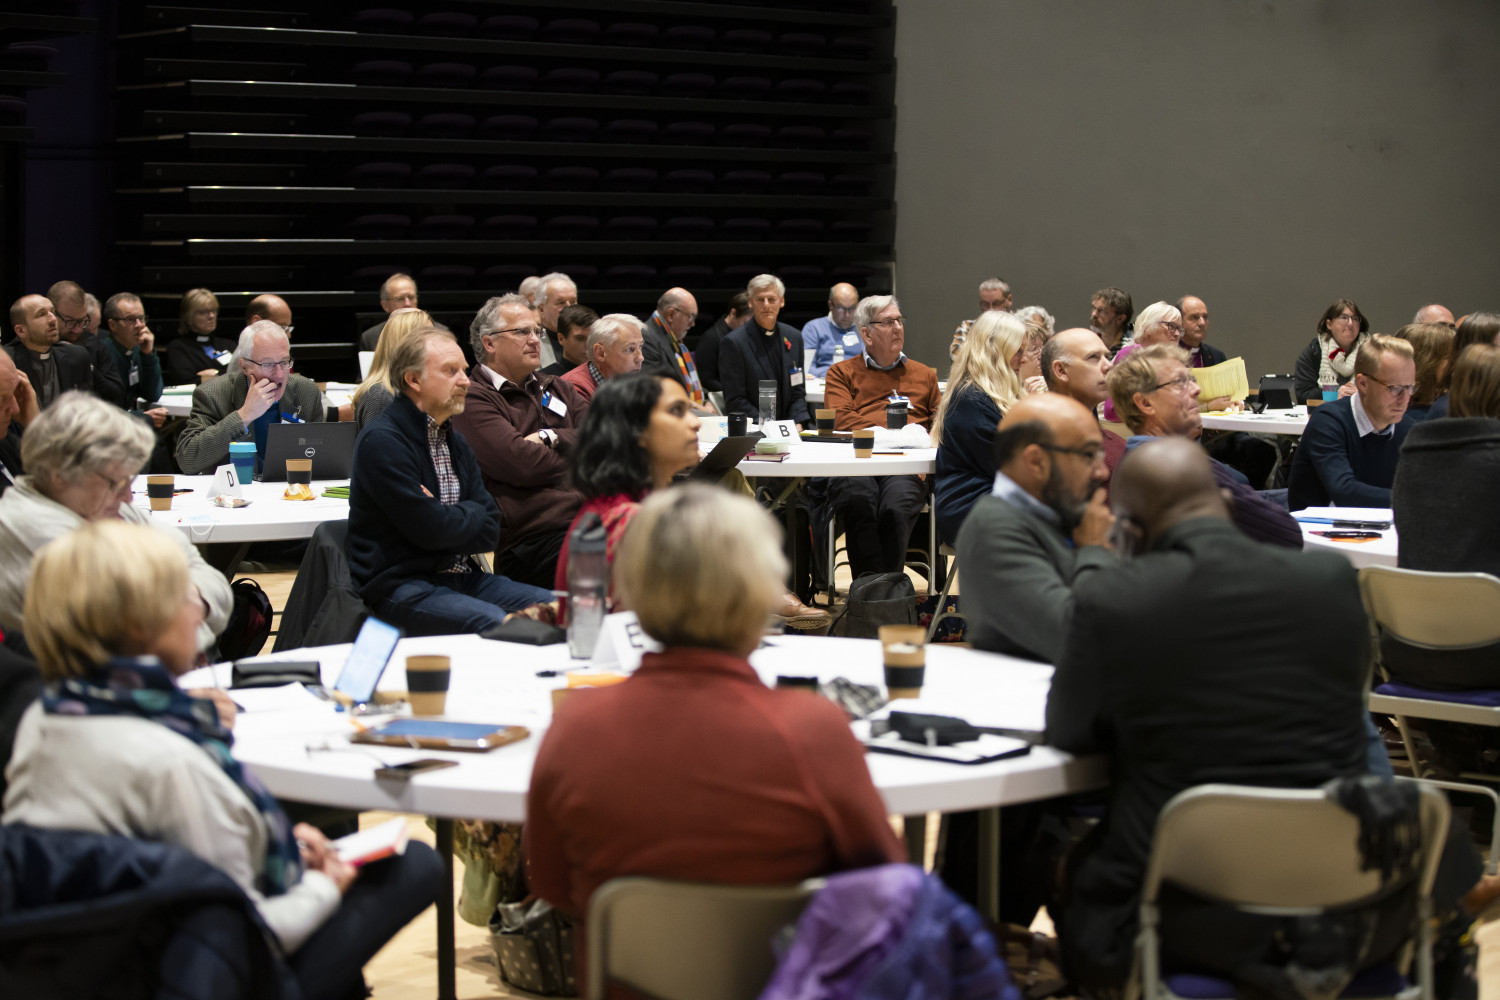 Image from Diocesan Synod 